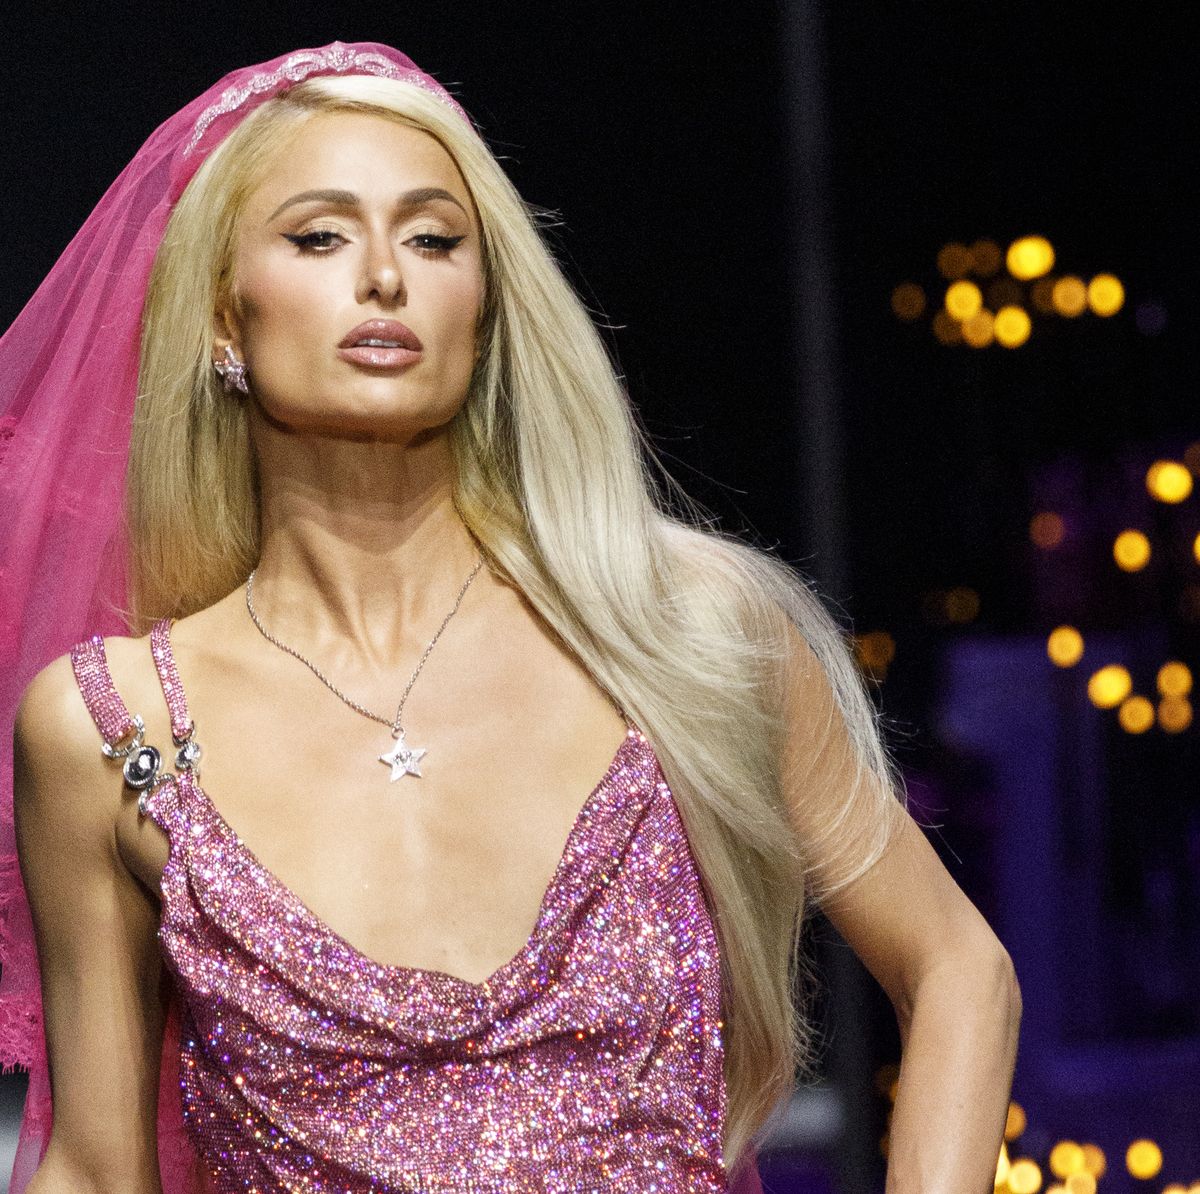 Paris Hilton's Versace make-up was as iconic as her outfit